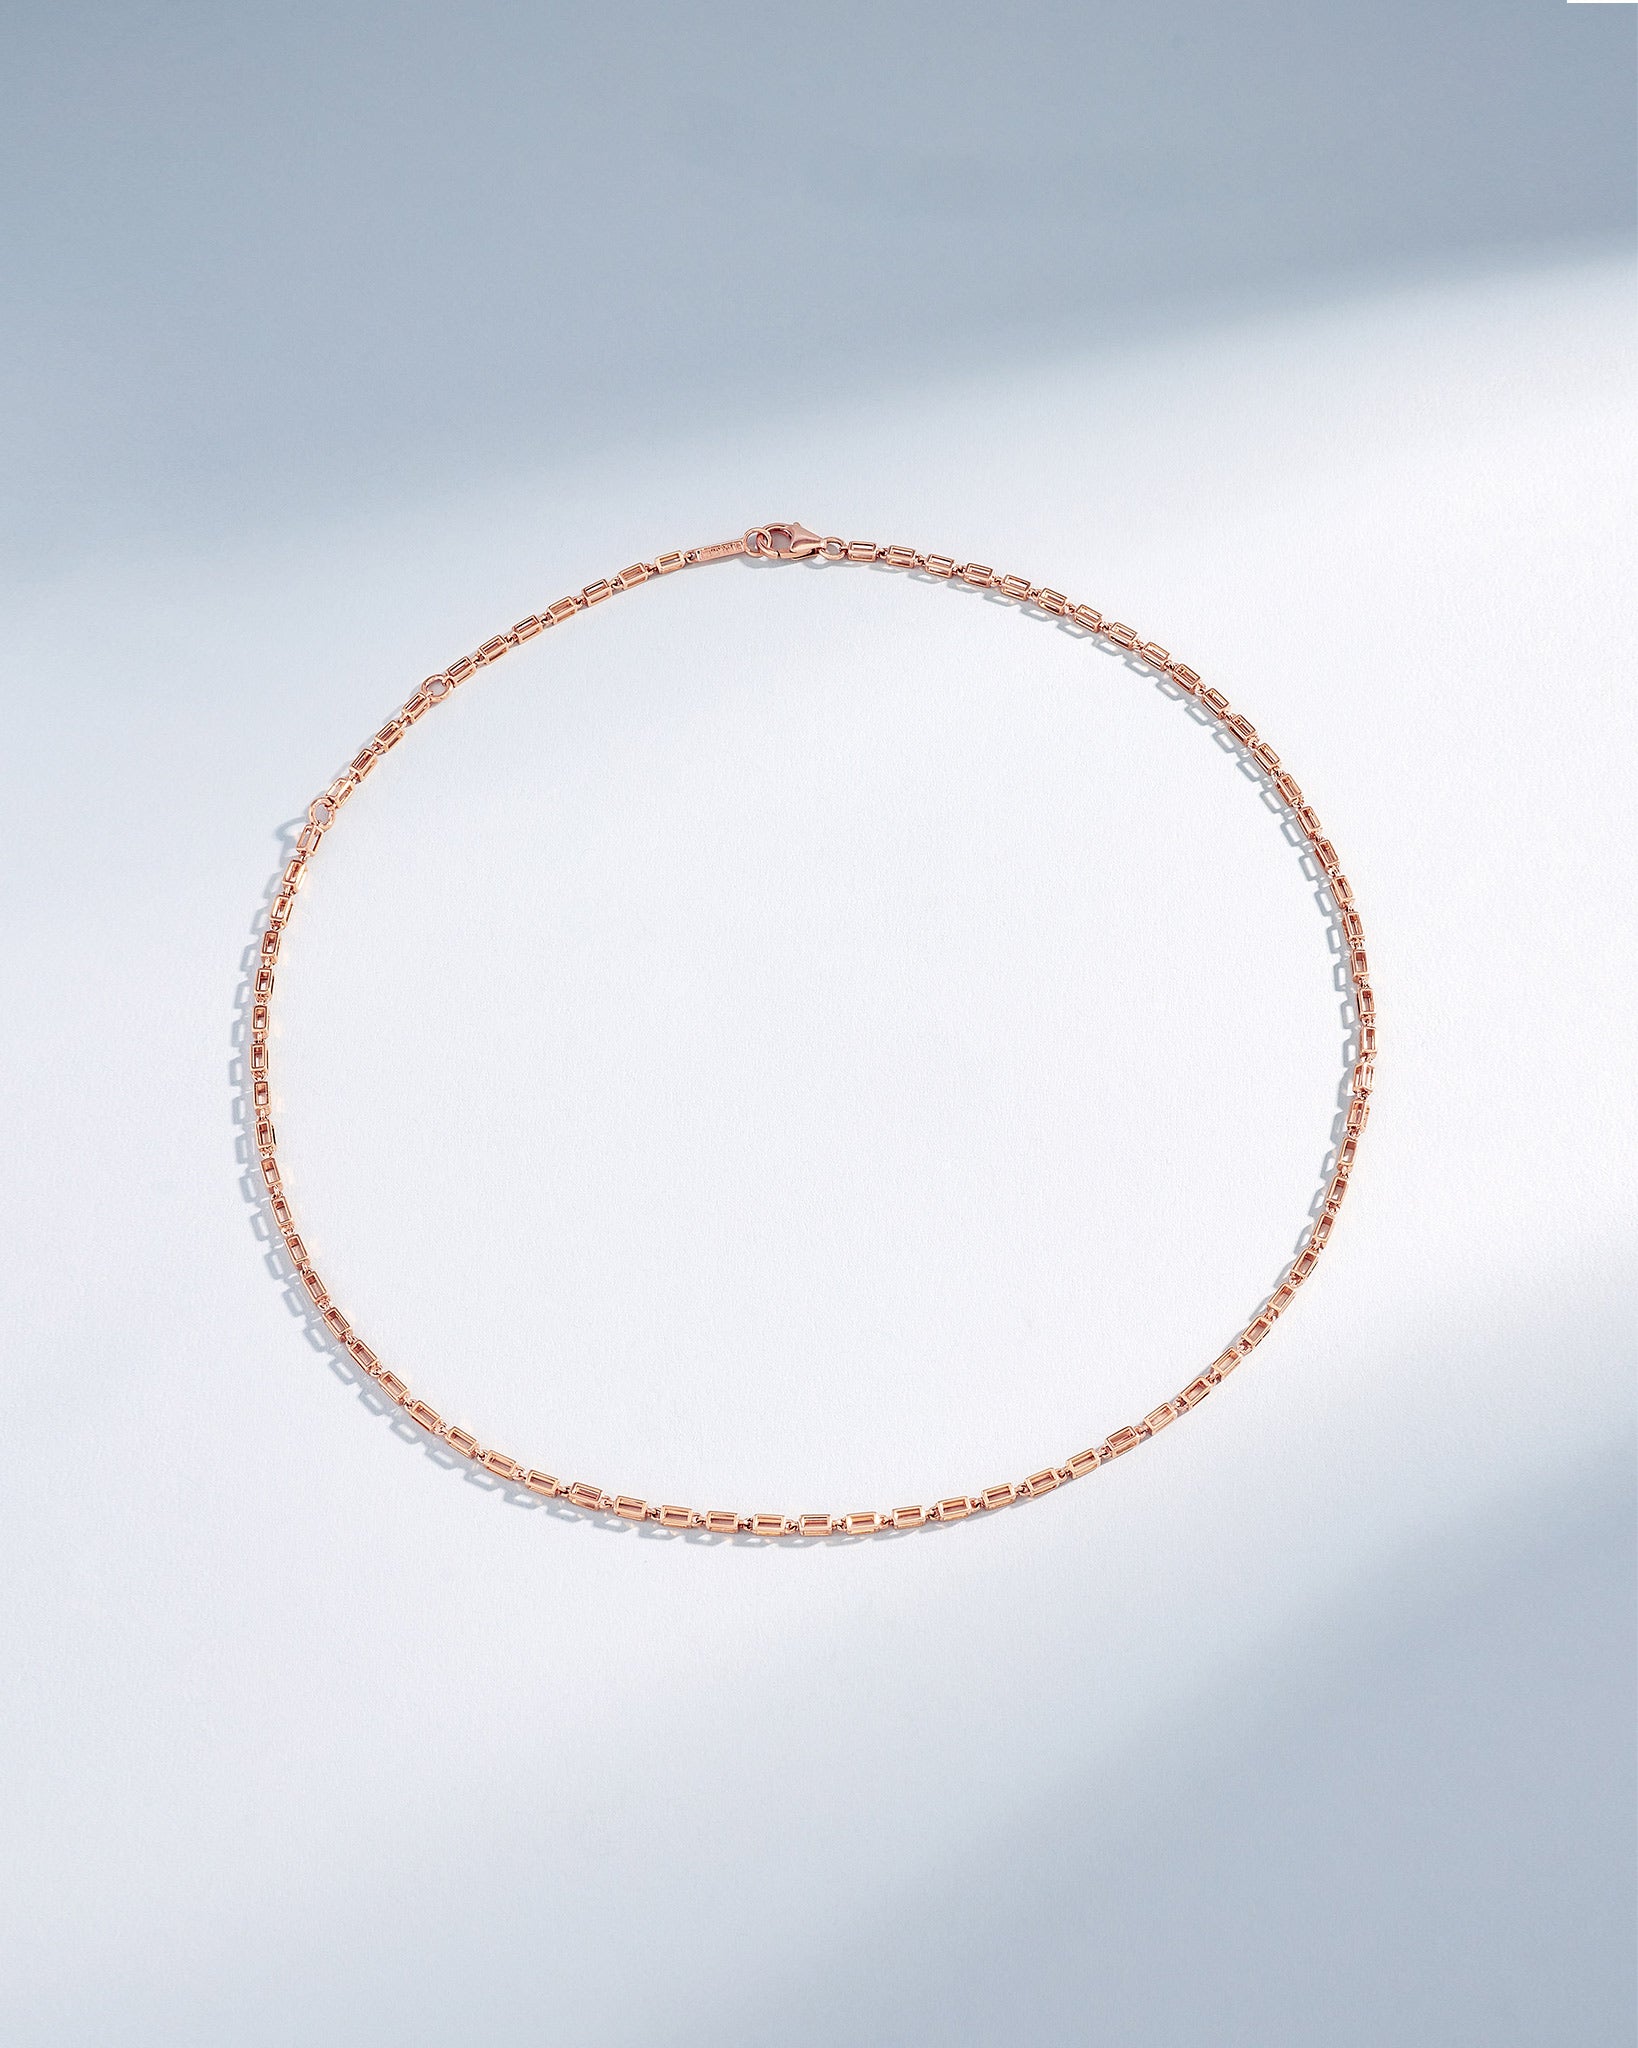 Suzanne Kalan Block-Chain Hollow Medium Necklace in 18k rose gold